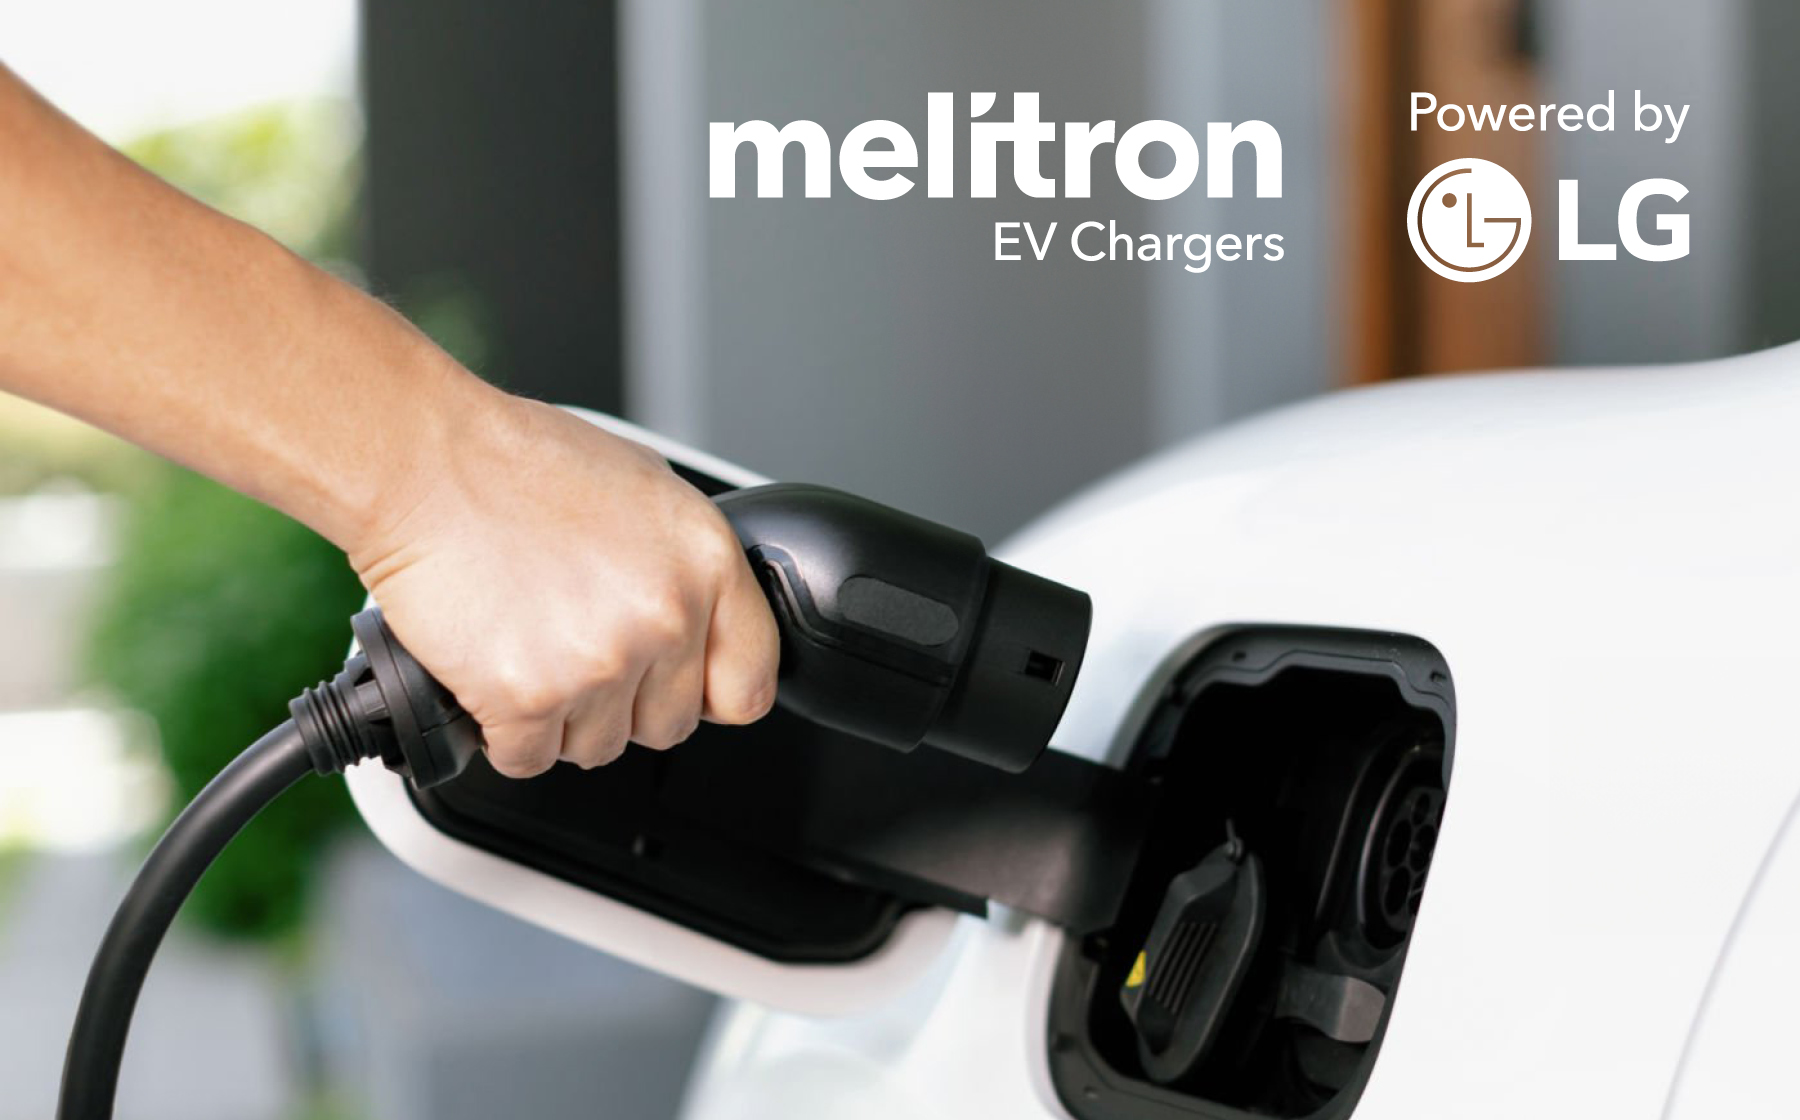 Melitron EV Chargers Powered by LG